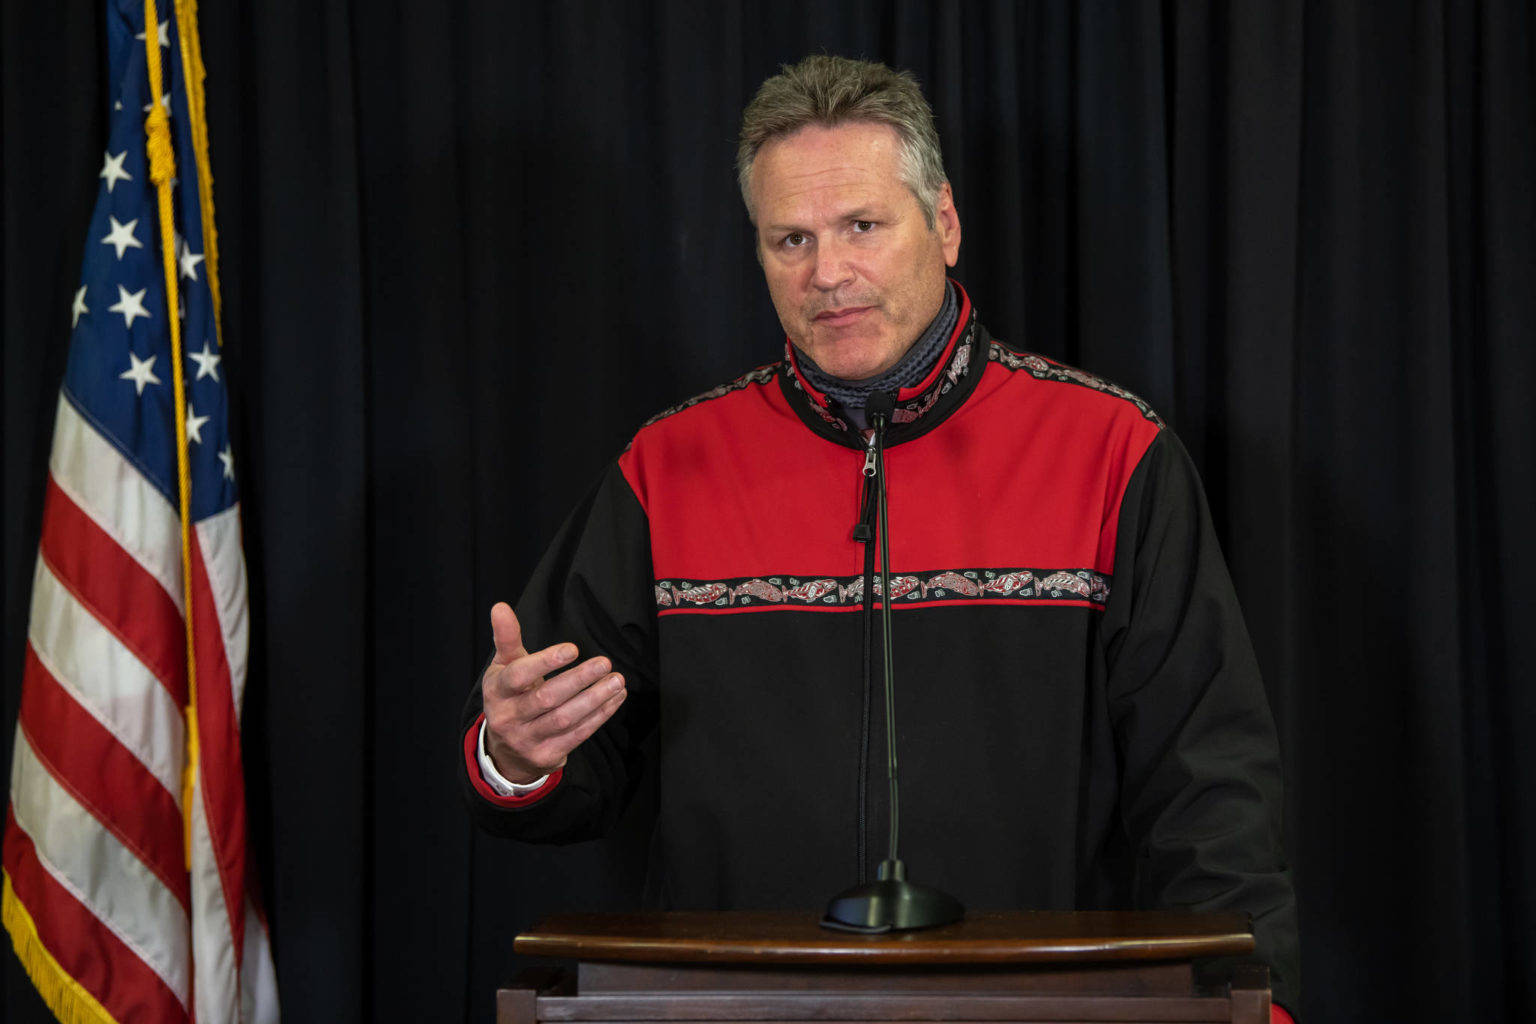 Gov. Mike Dunleavy speaks during an August news conference. On thursday, Dunleavy withdrew an executive order reorganizing the state’s largest department, the Department of Health and Social Services, after lawmakers sought to block it. (Courtesy Photo / Office of Gov. Mike Dunleavy)